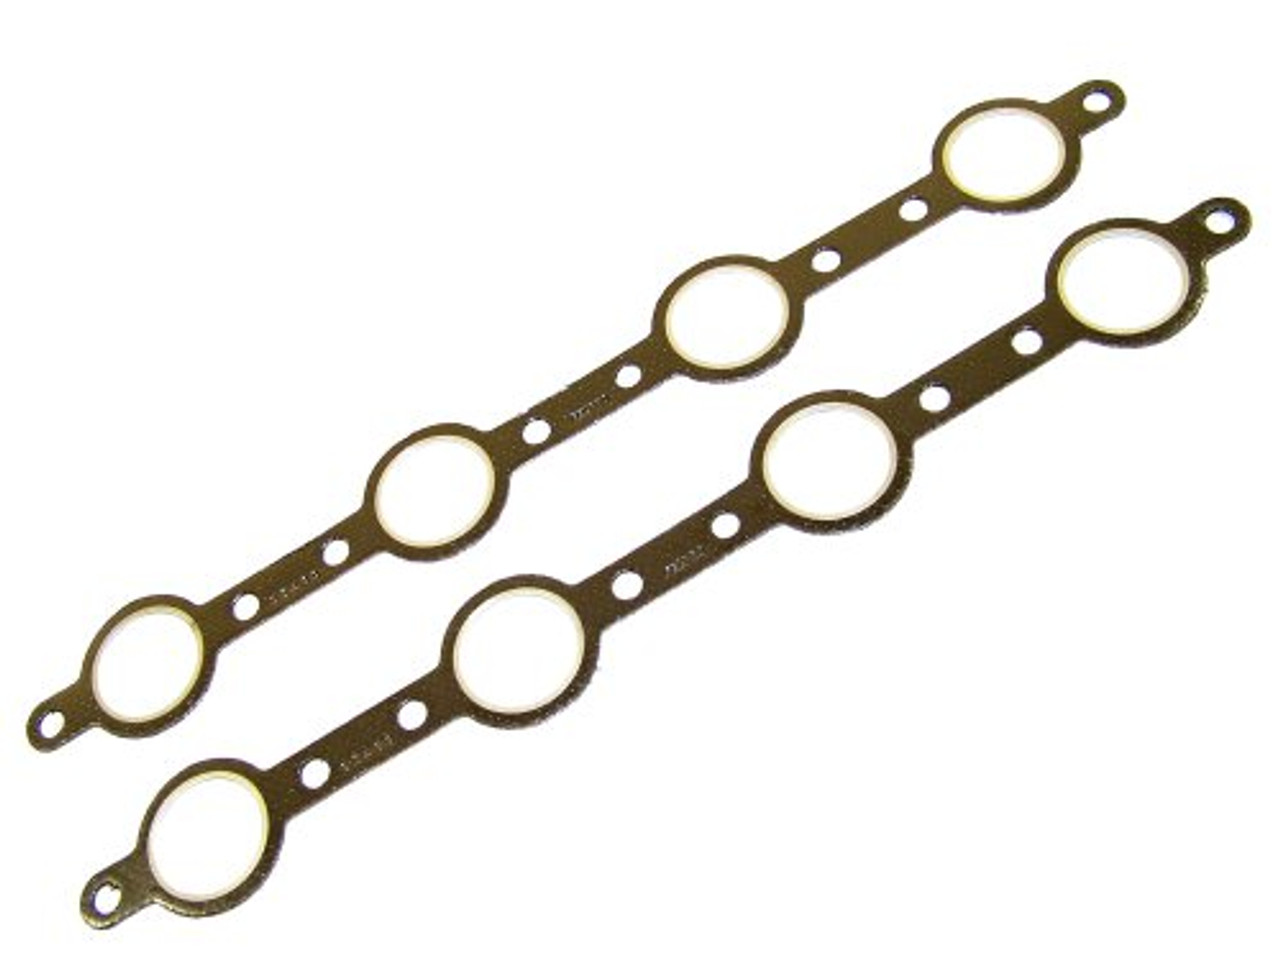 Exhaust Manifold Gasket - 1997 Ford F-250 HD 7.3L Engine Parts # EG4200ZE37